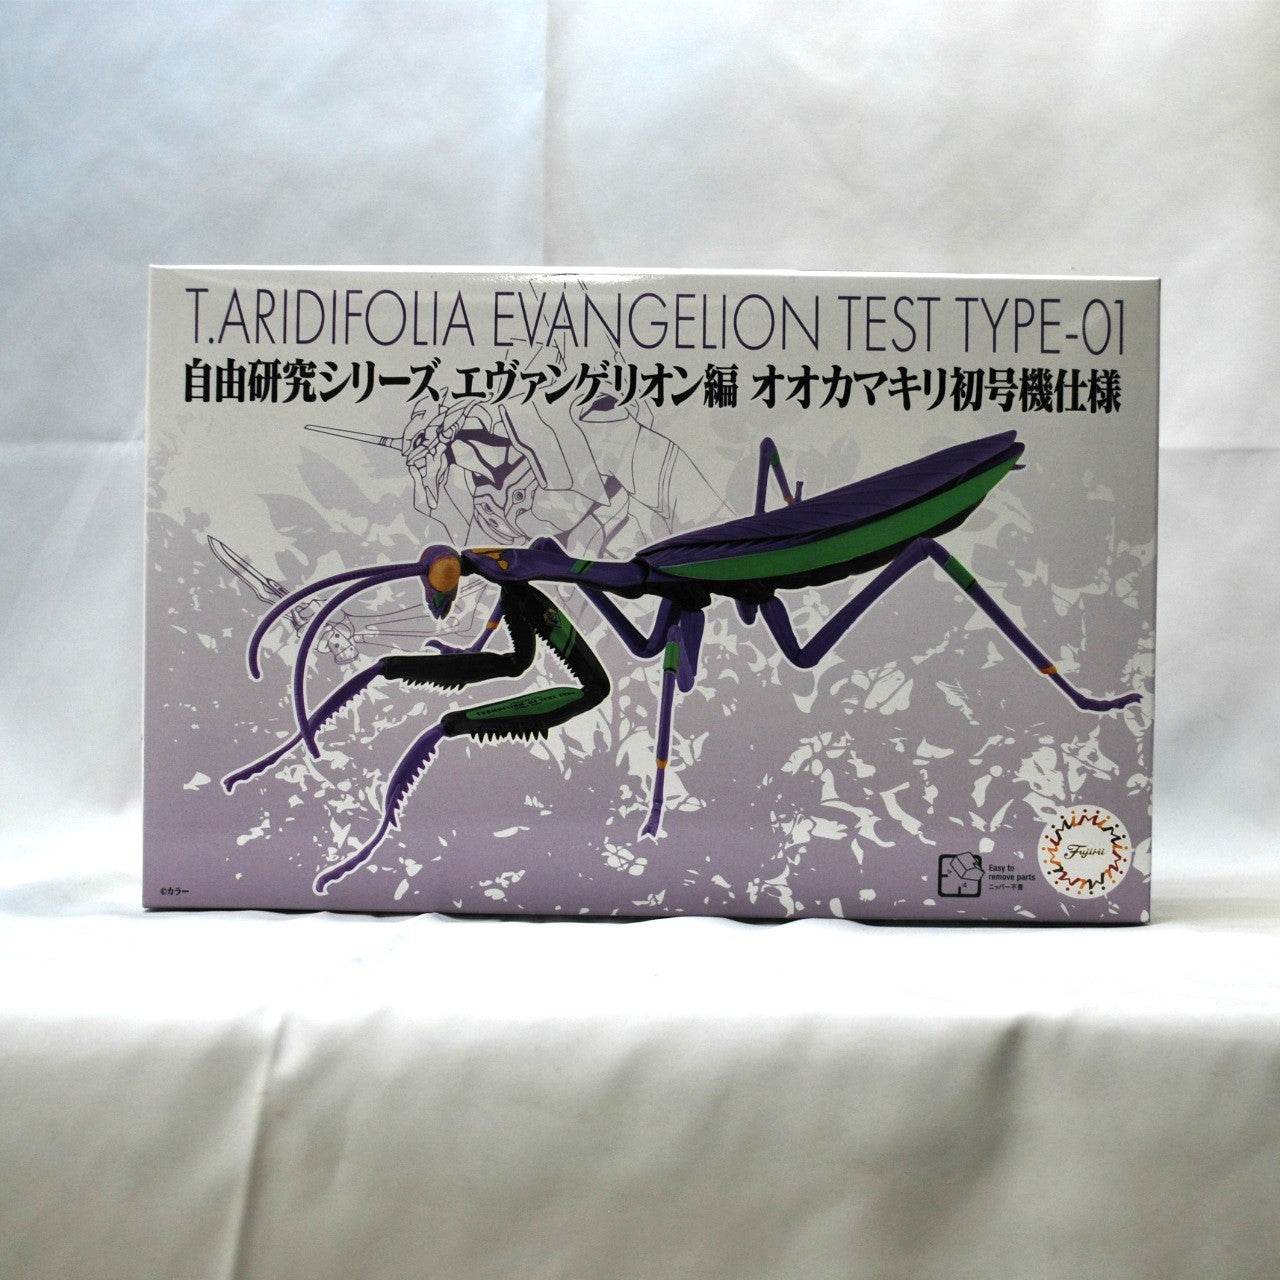 Fujimi Model Free Research Series No. 231 Evangelion Edition Giant Mantis Unit 01 Specifications